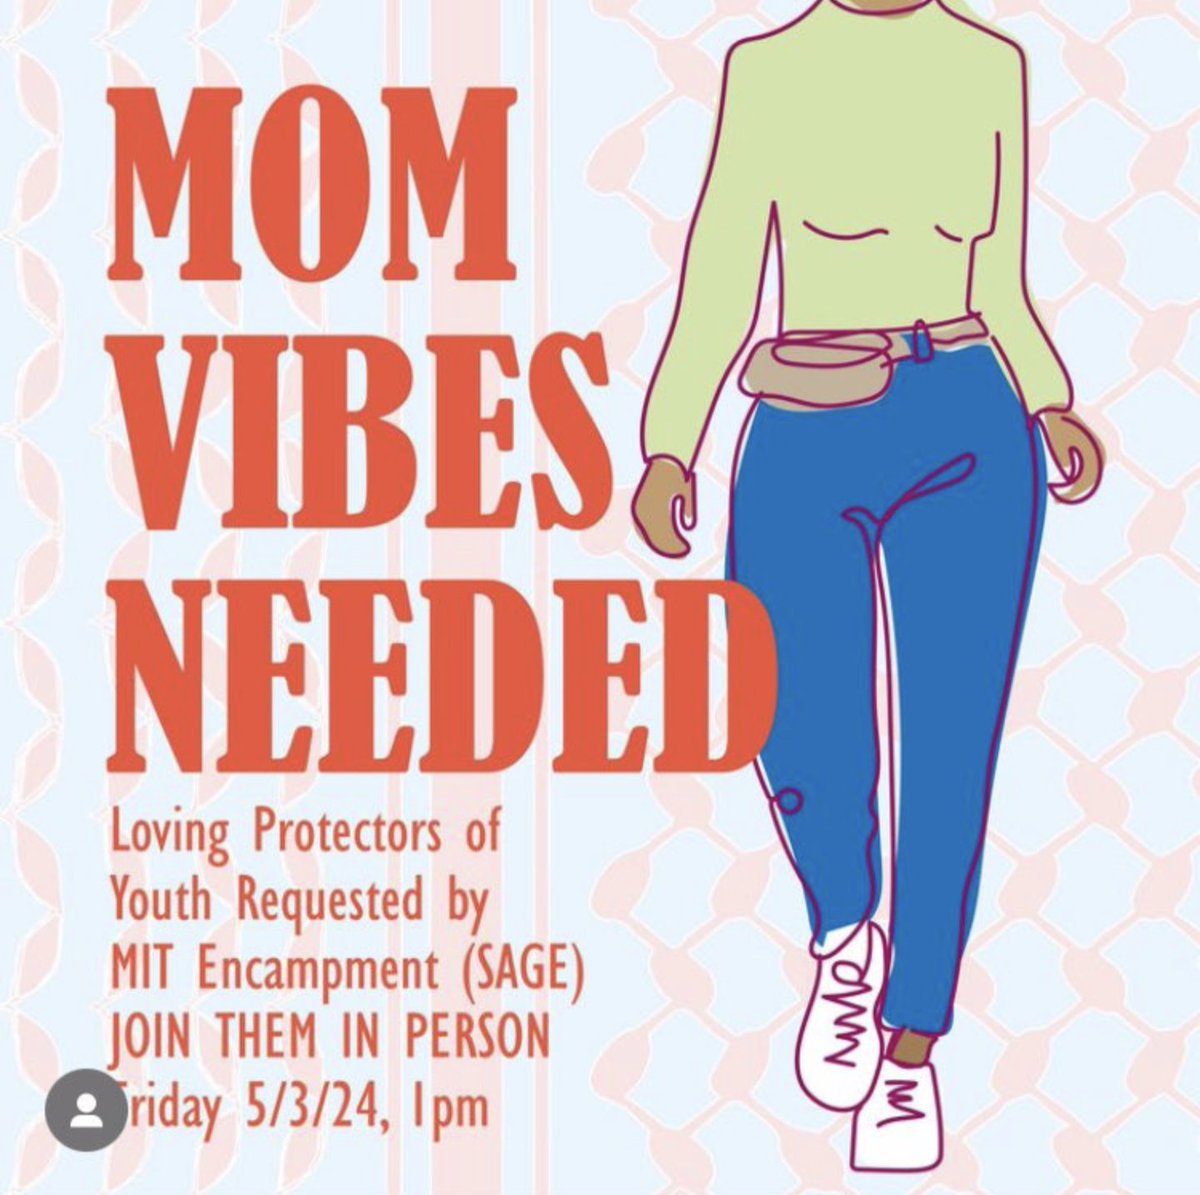 Mom vibes needed, loving protectors of youth requested at MIT today at 1pm.